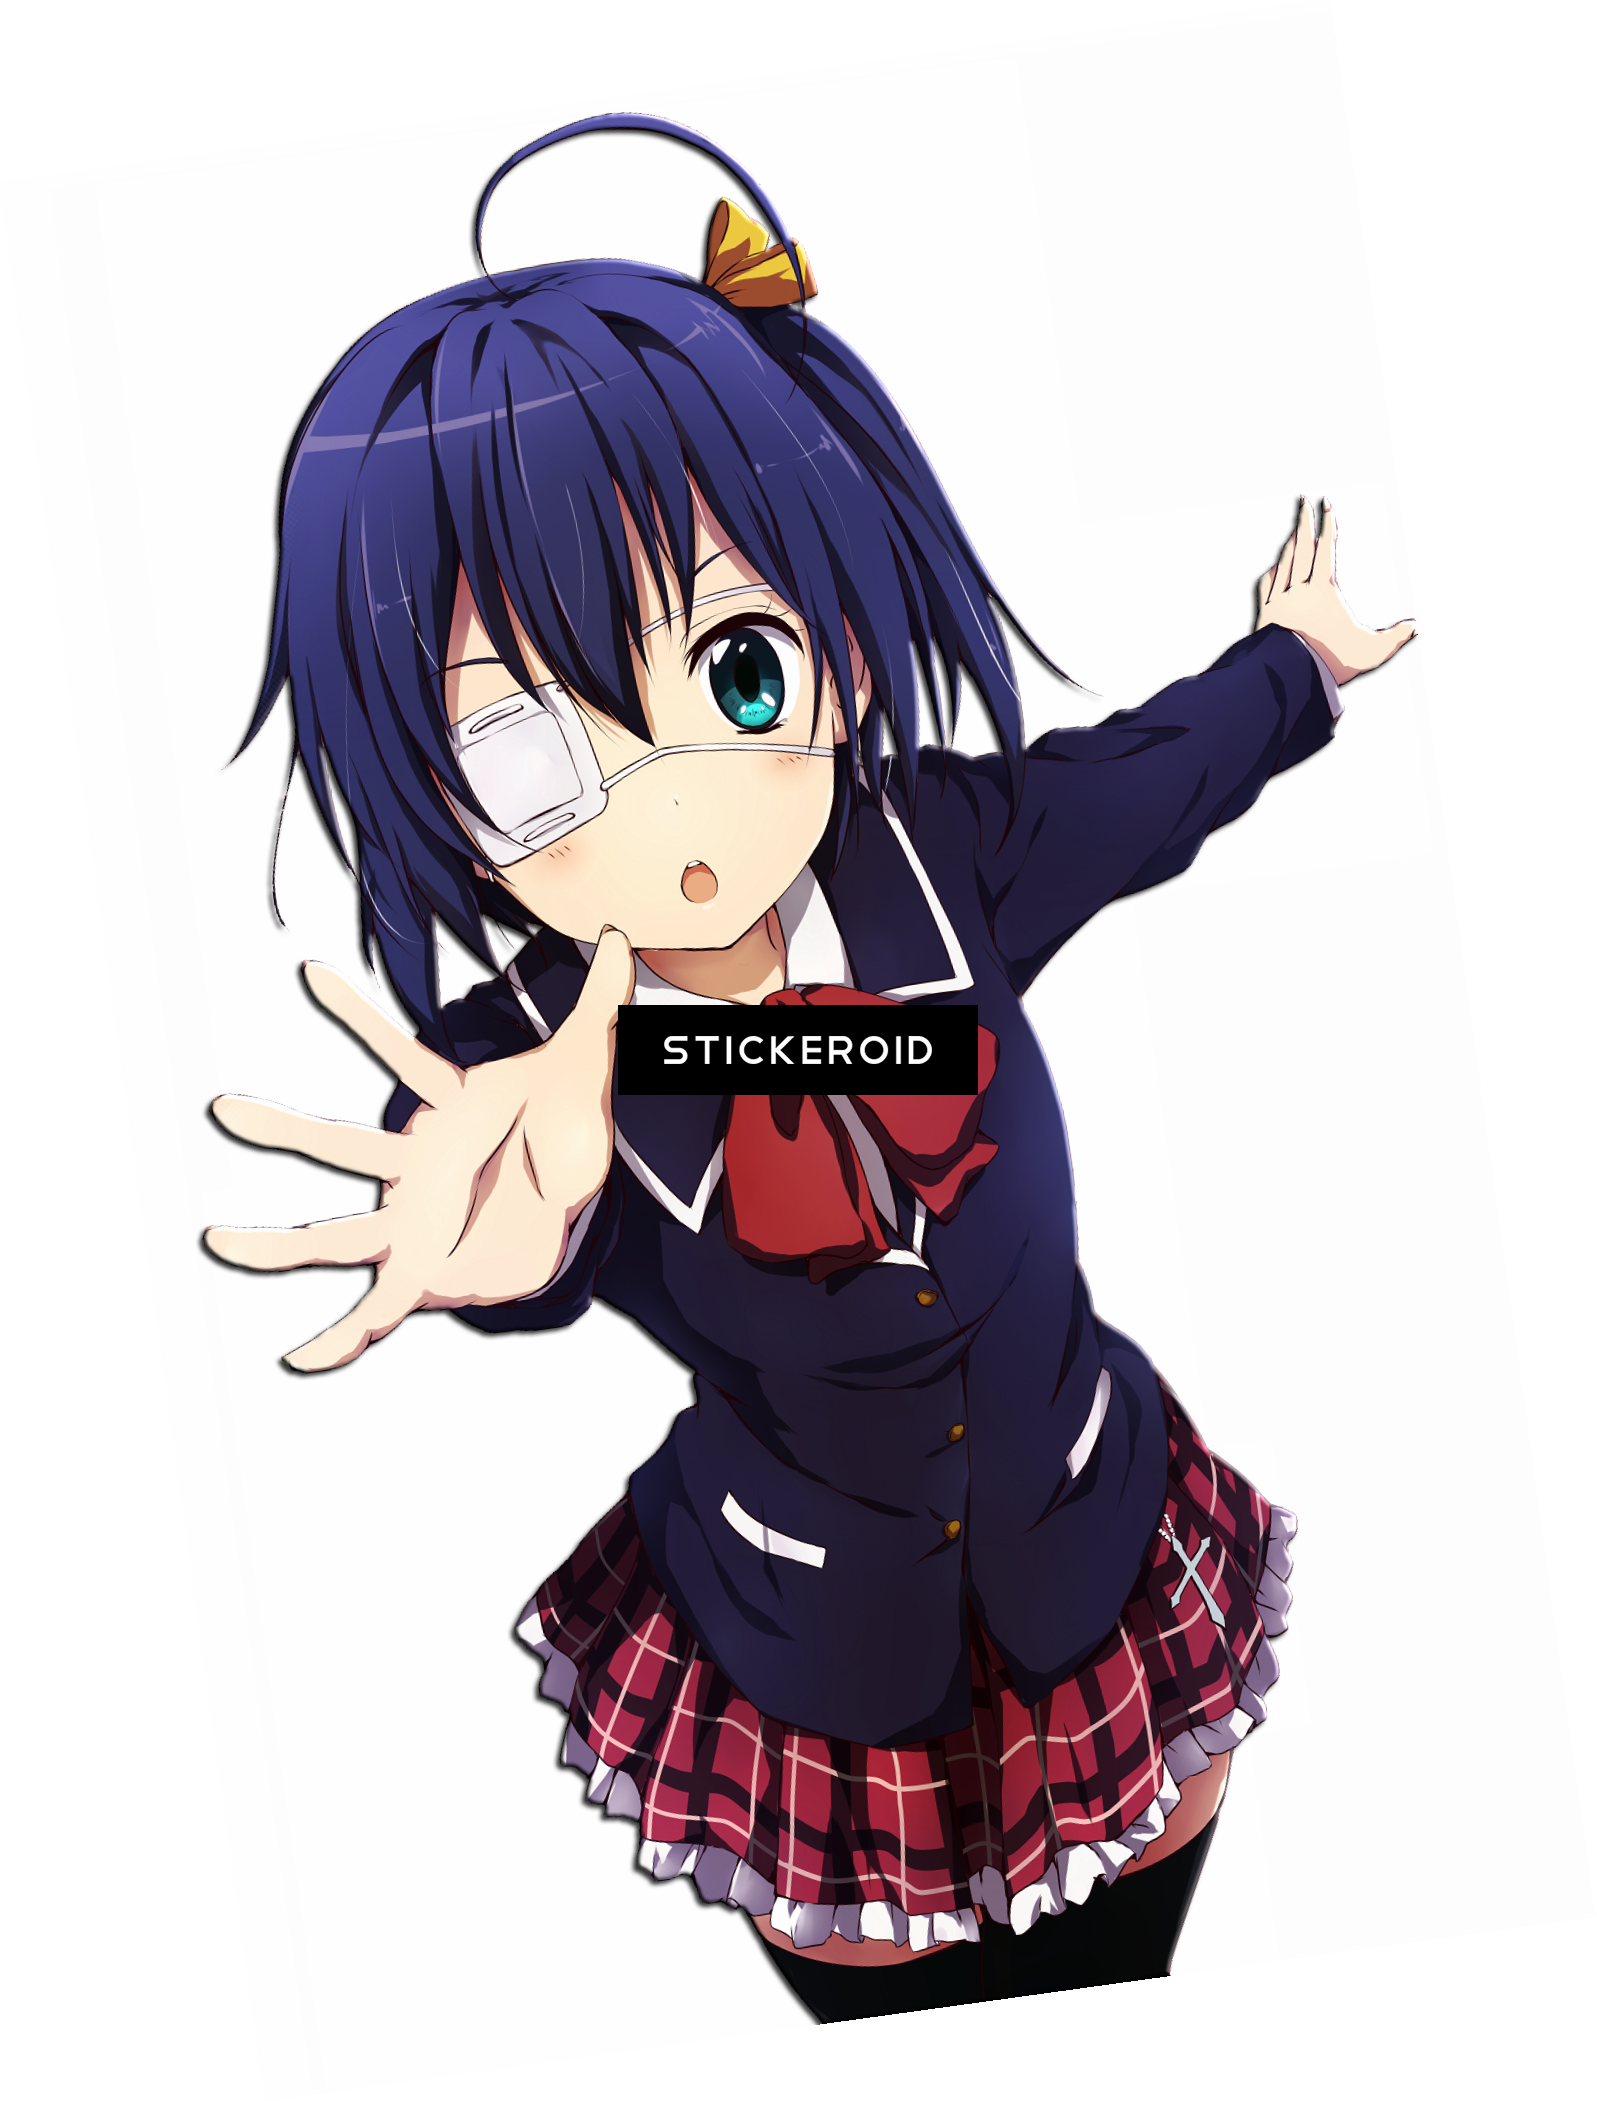 Download Anime - Chuunibyou Rikka PNG Image with No Background - PNGkey.com